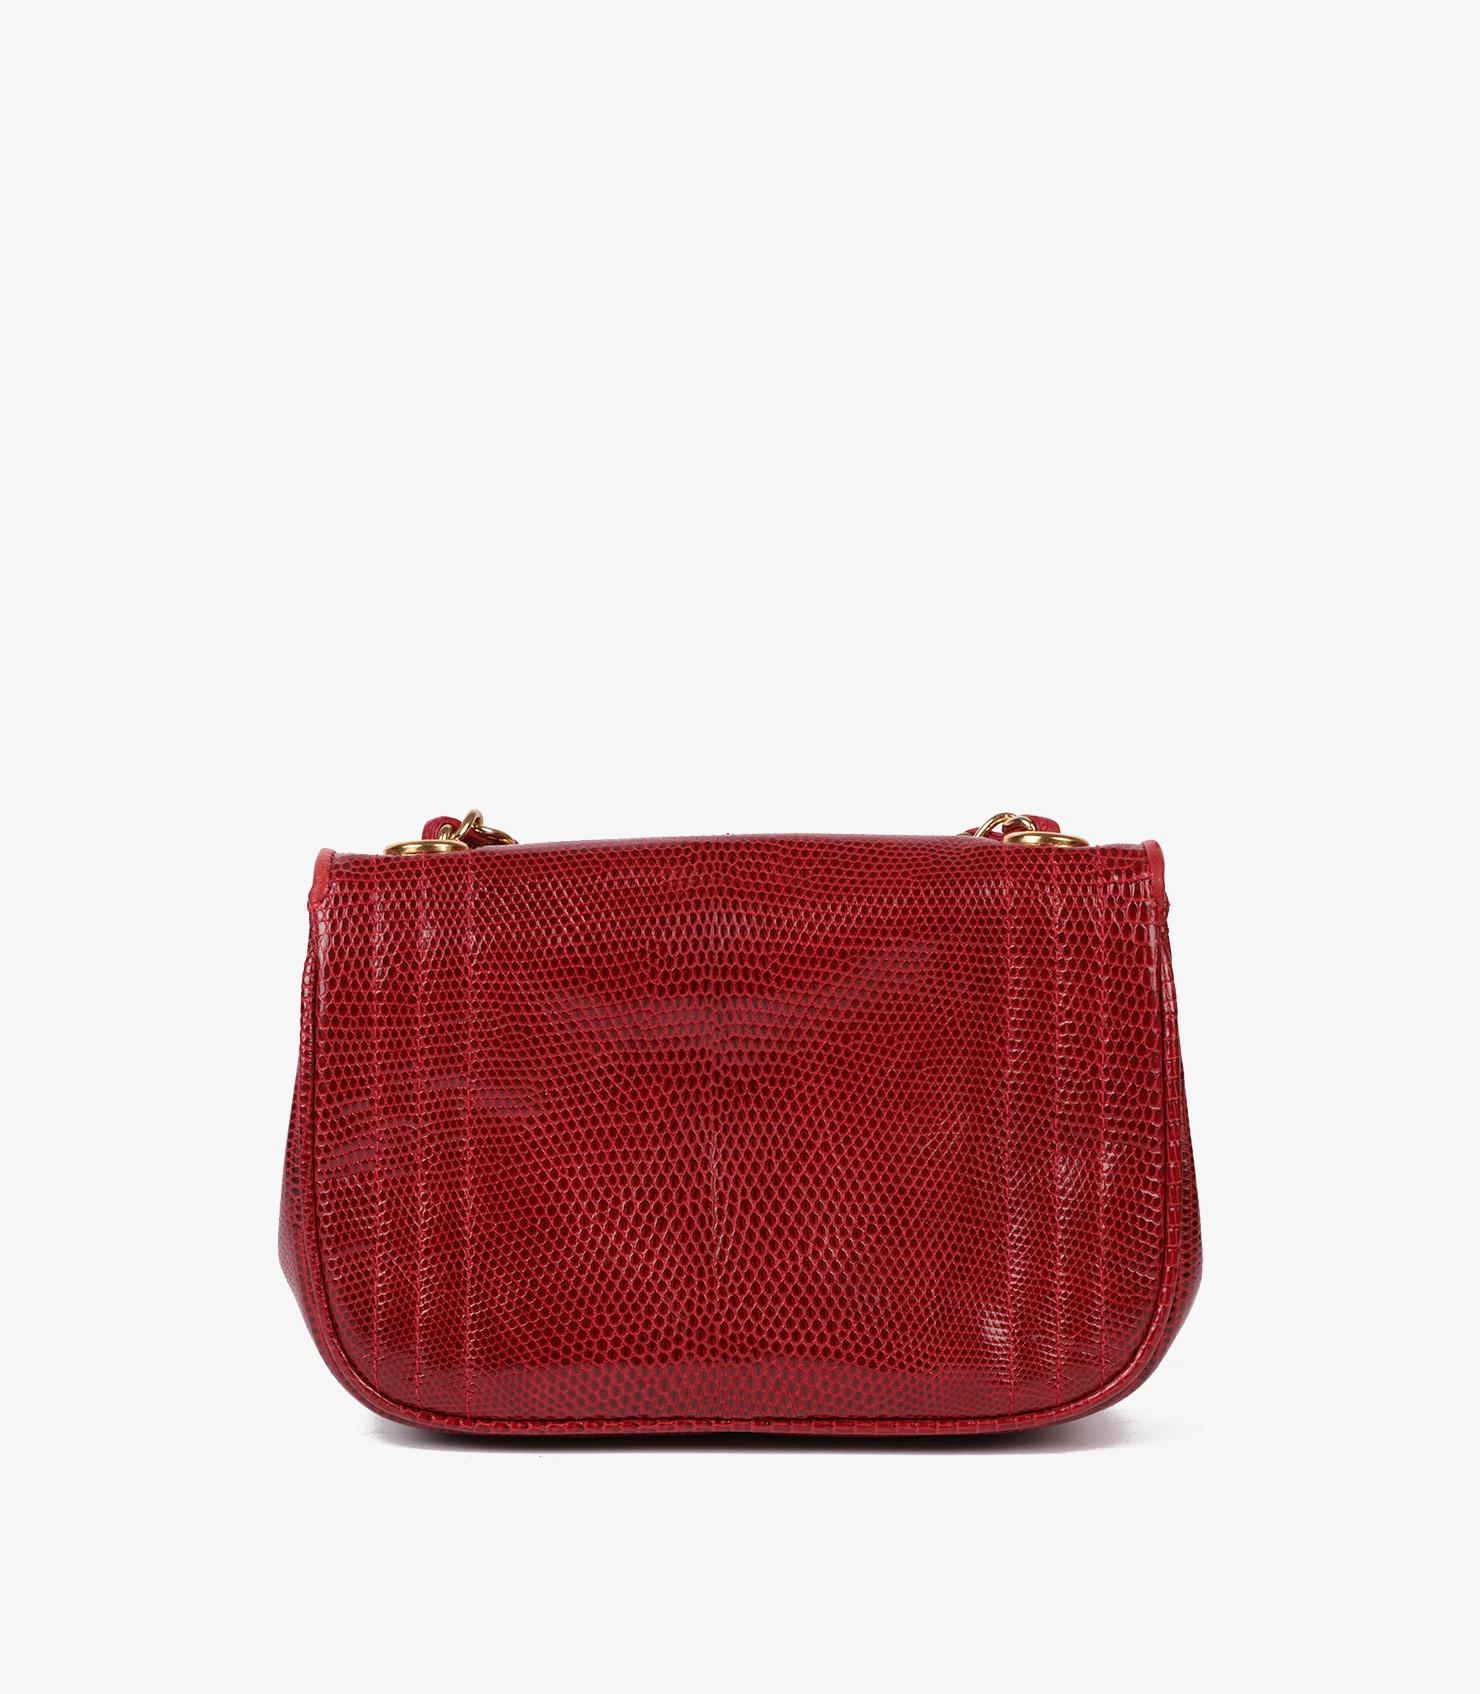 Chanel Red Lizard Leather Vintage Timeless Mini Flap Bag 1